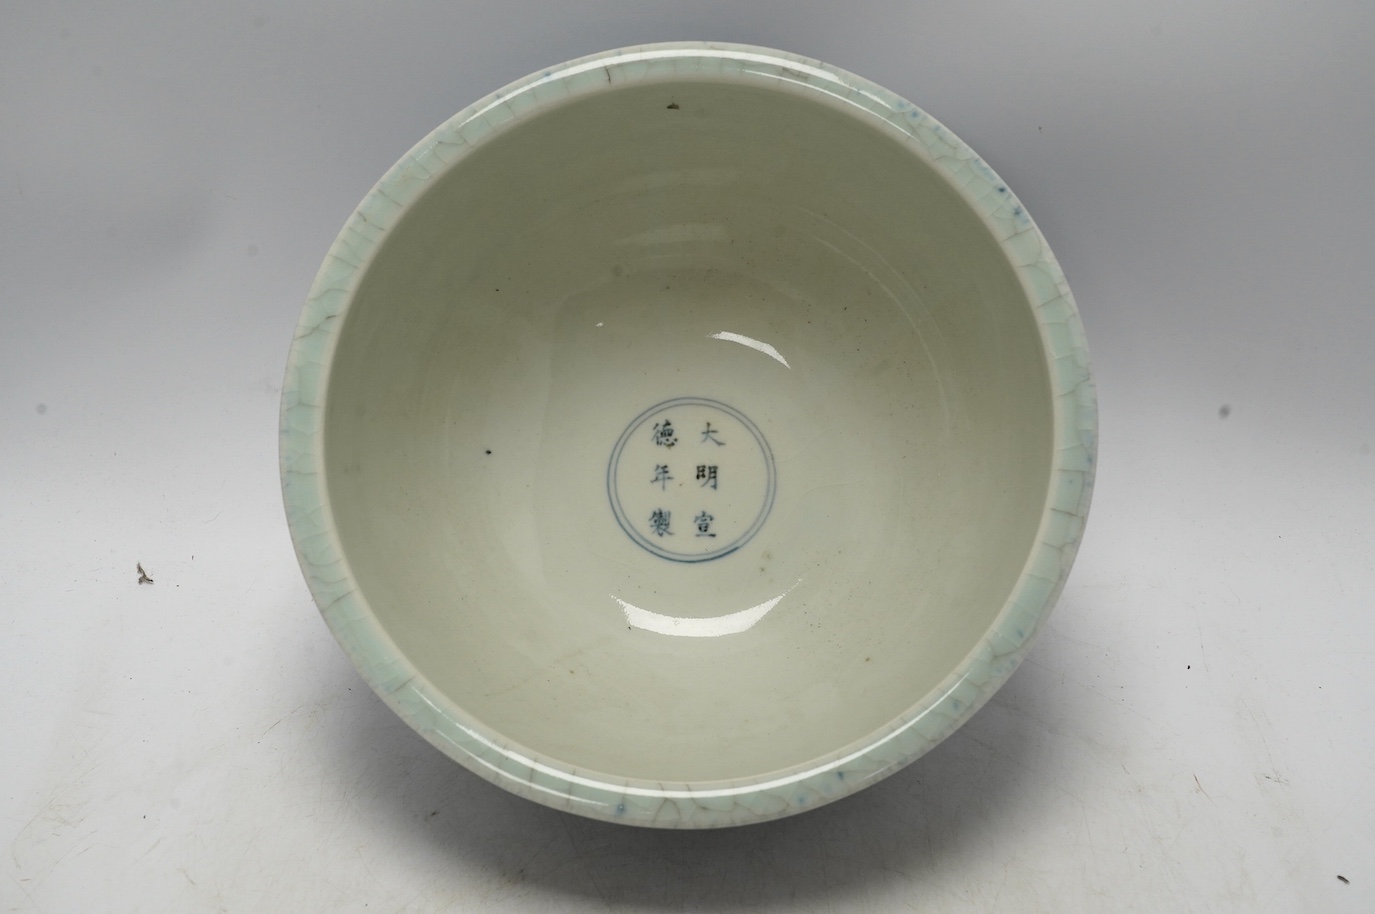 A large Chinese blue and white ‘dragon’ bowl decorated in low relief, 28cm in diameter. Condition - good